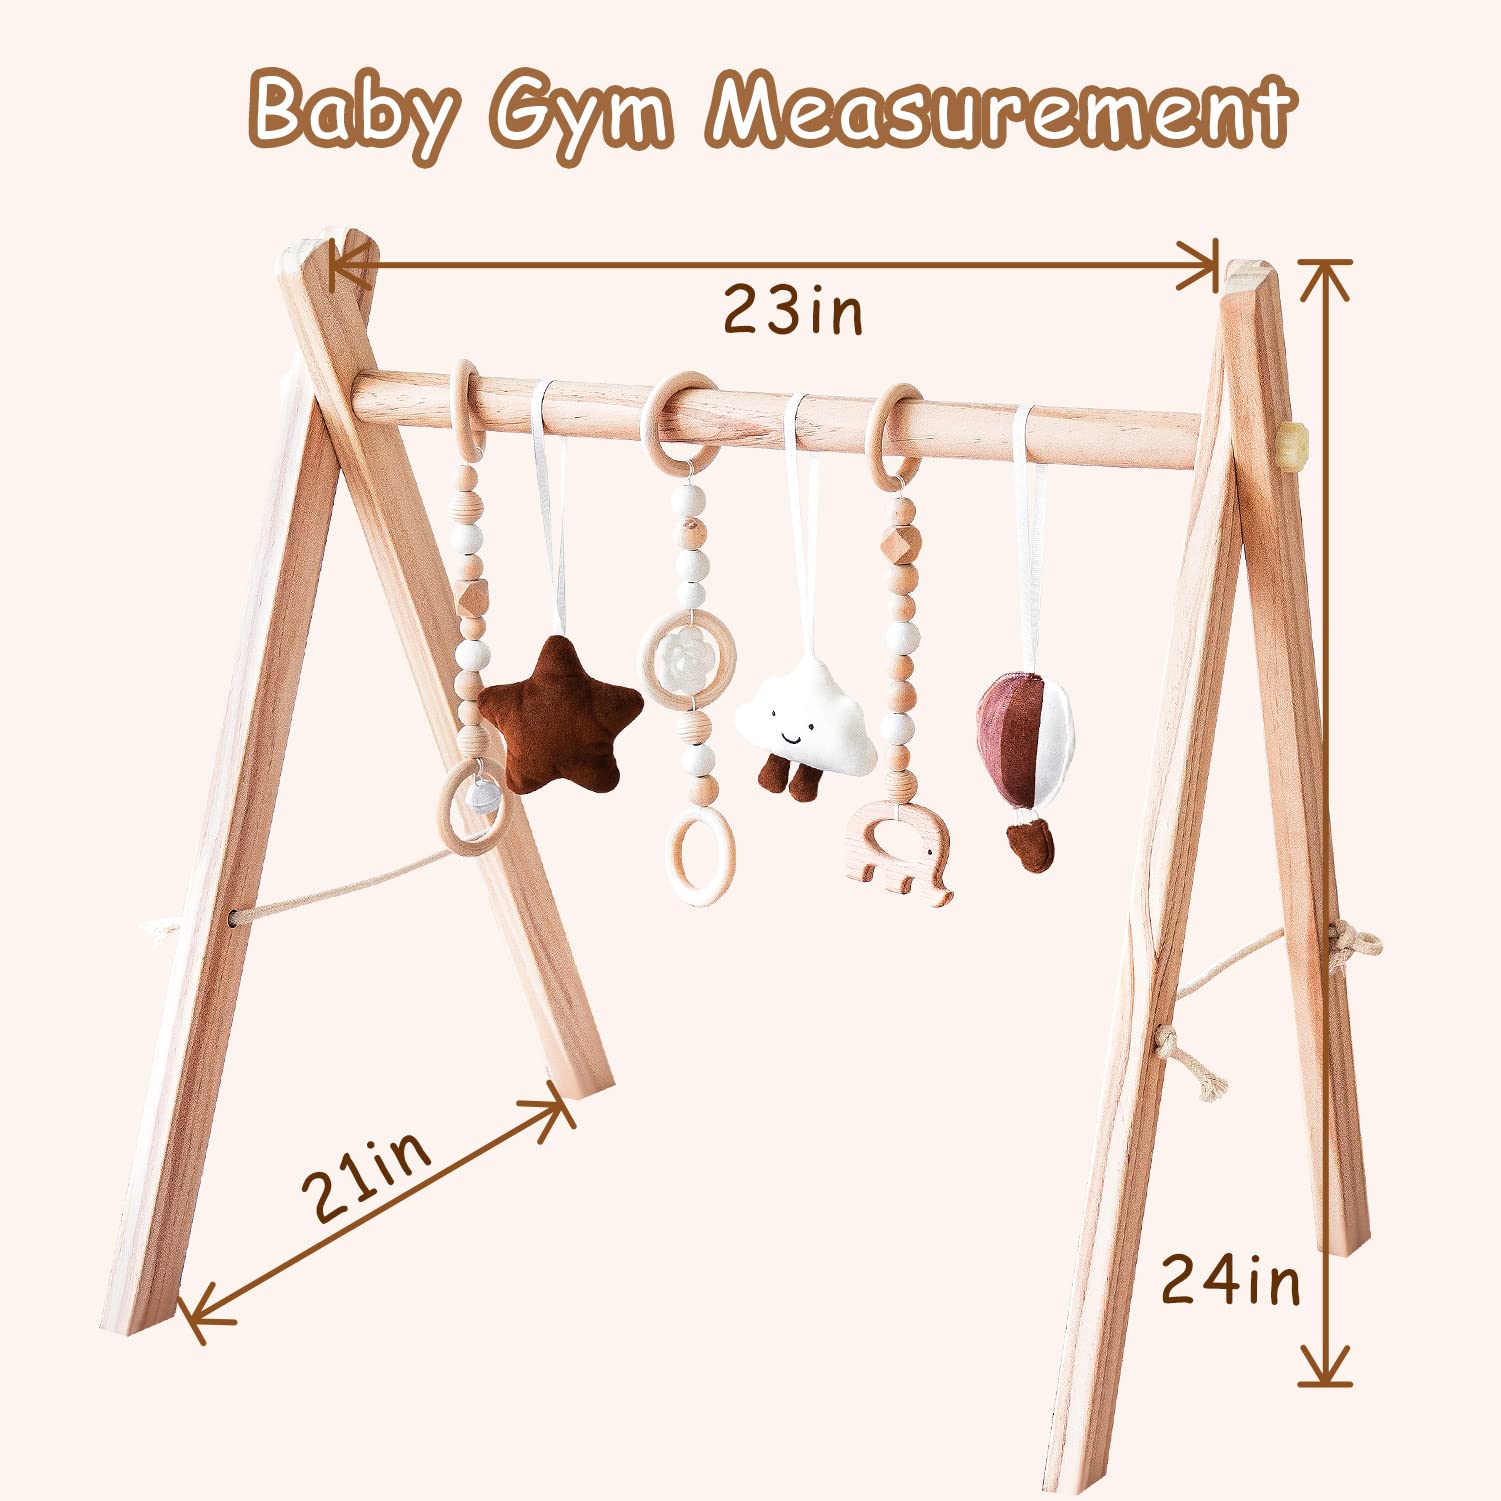 Wooden Baby Play Gym with Mat, Foldable Baby Play Gym Frame Activity Gym Hanging Bar with 5 Gym Baby Toys Rainbow Playmats Gift for Newborn Baby (Natural)